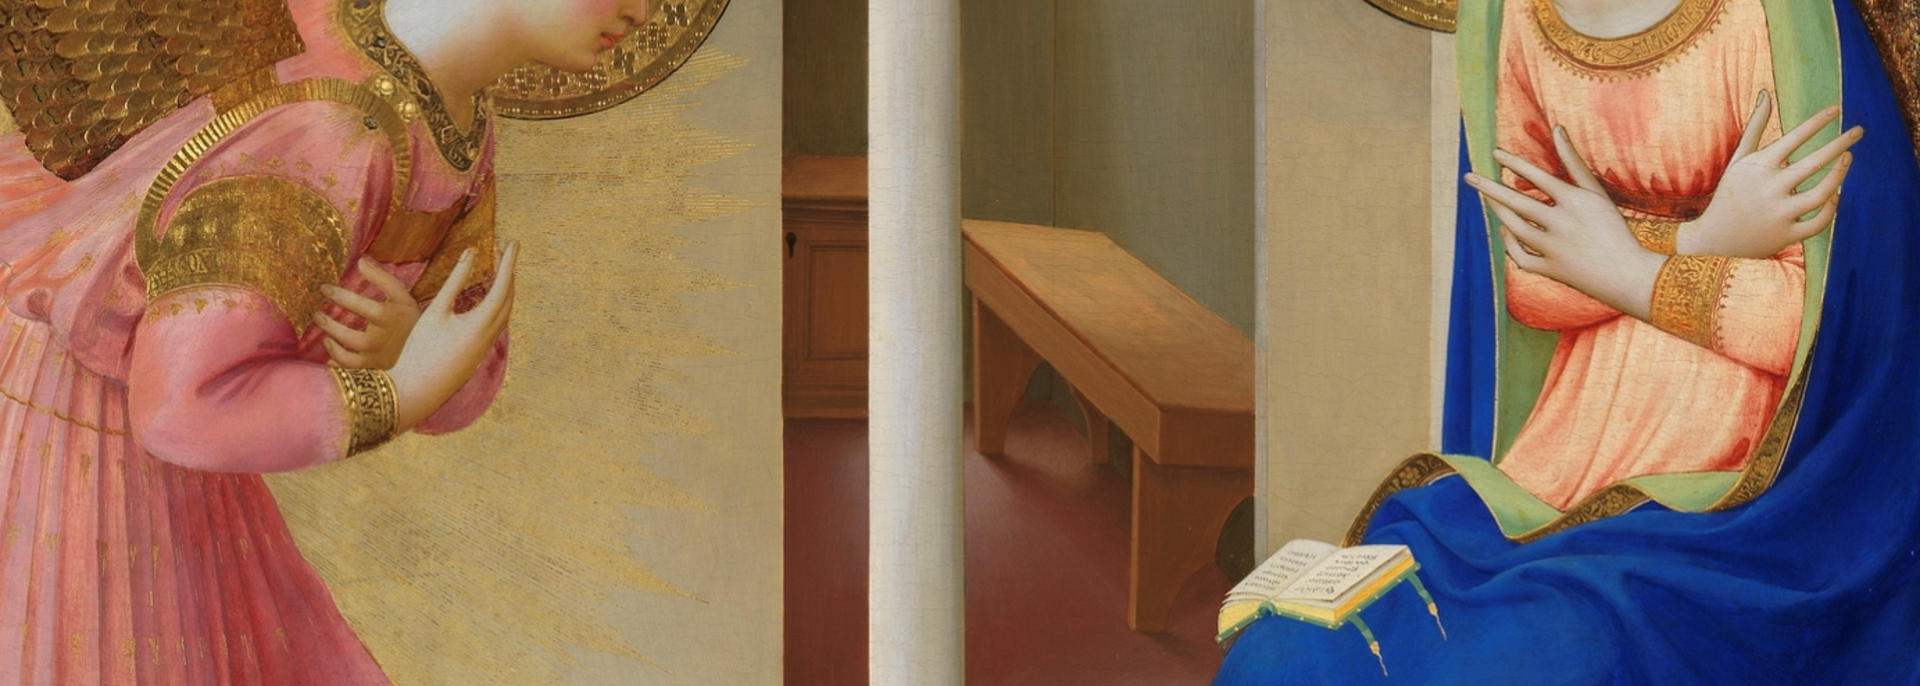 Details from a Fra Angelico Annunciations.